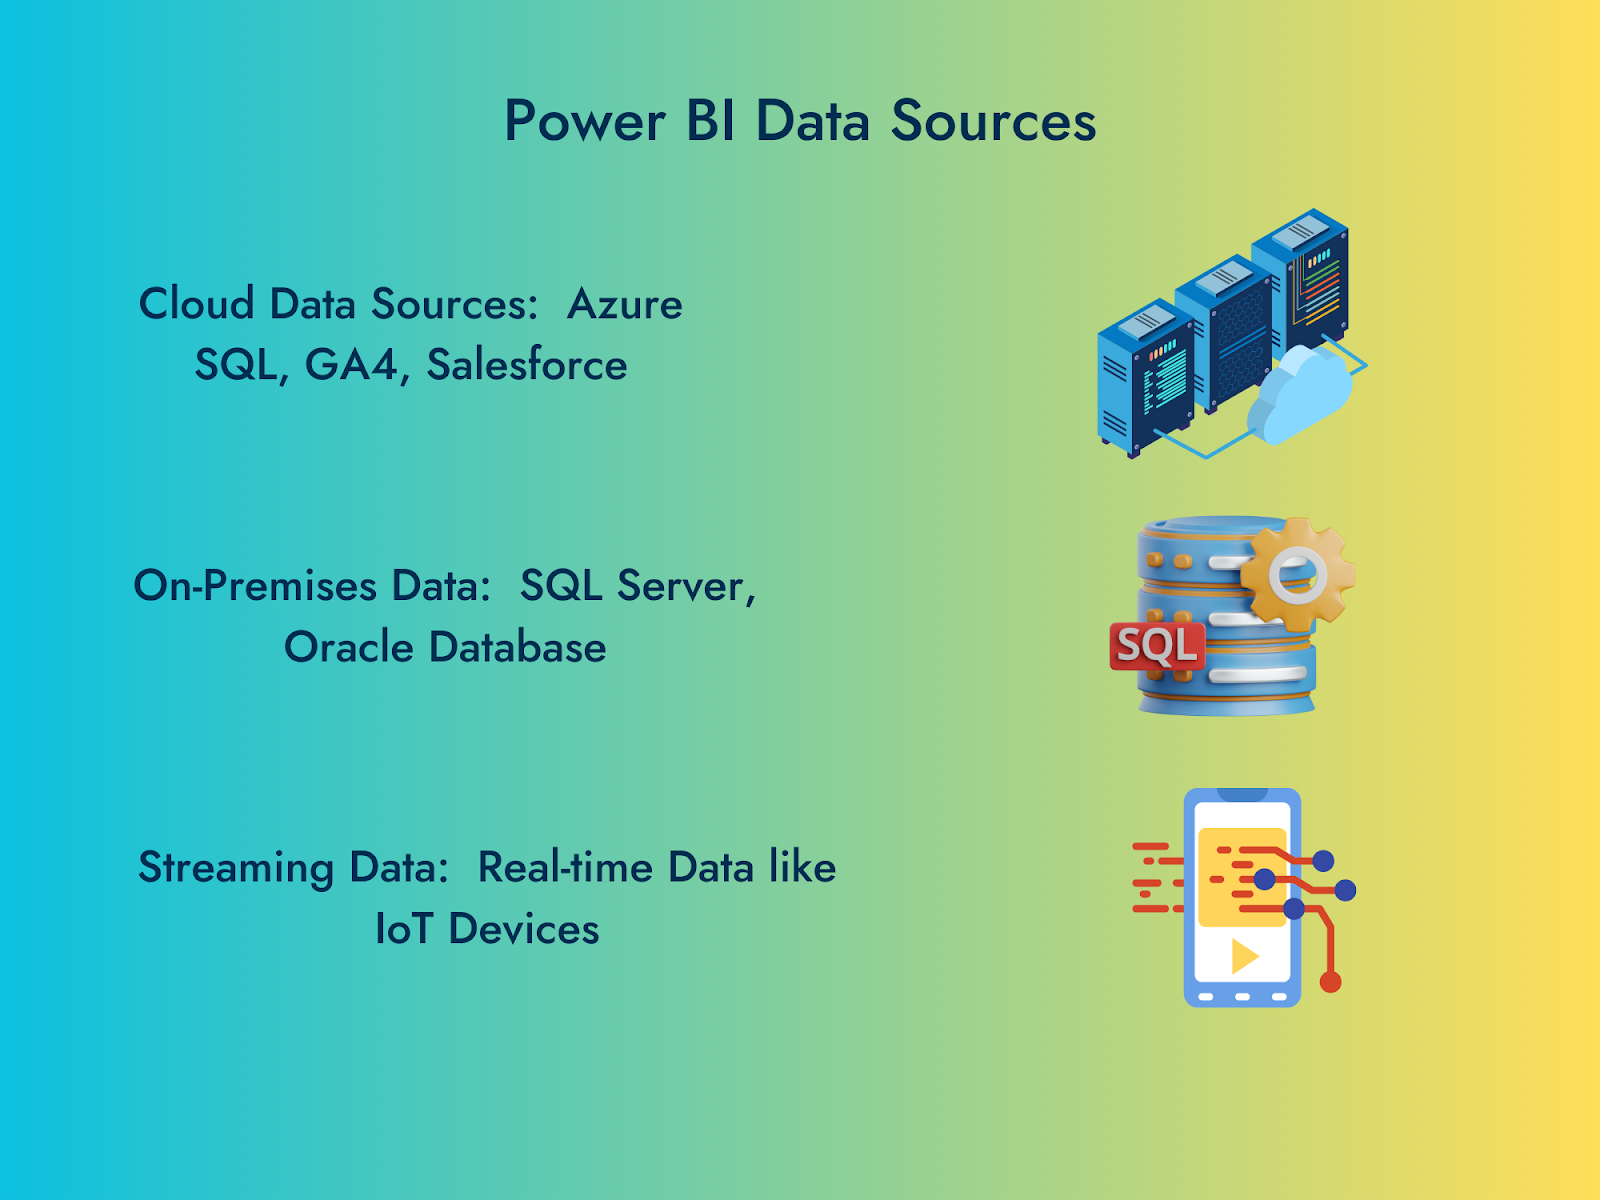 Types of Data Sources in Power BI 